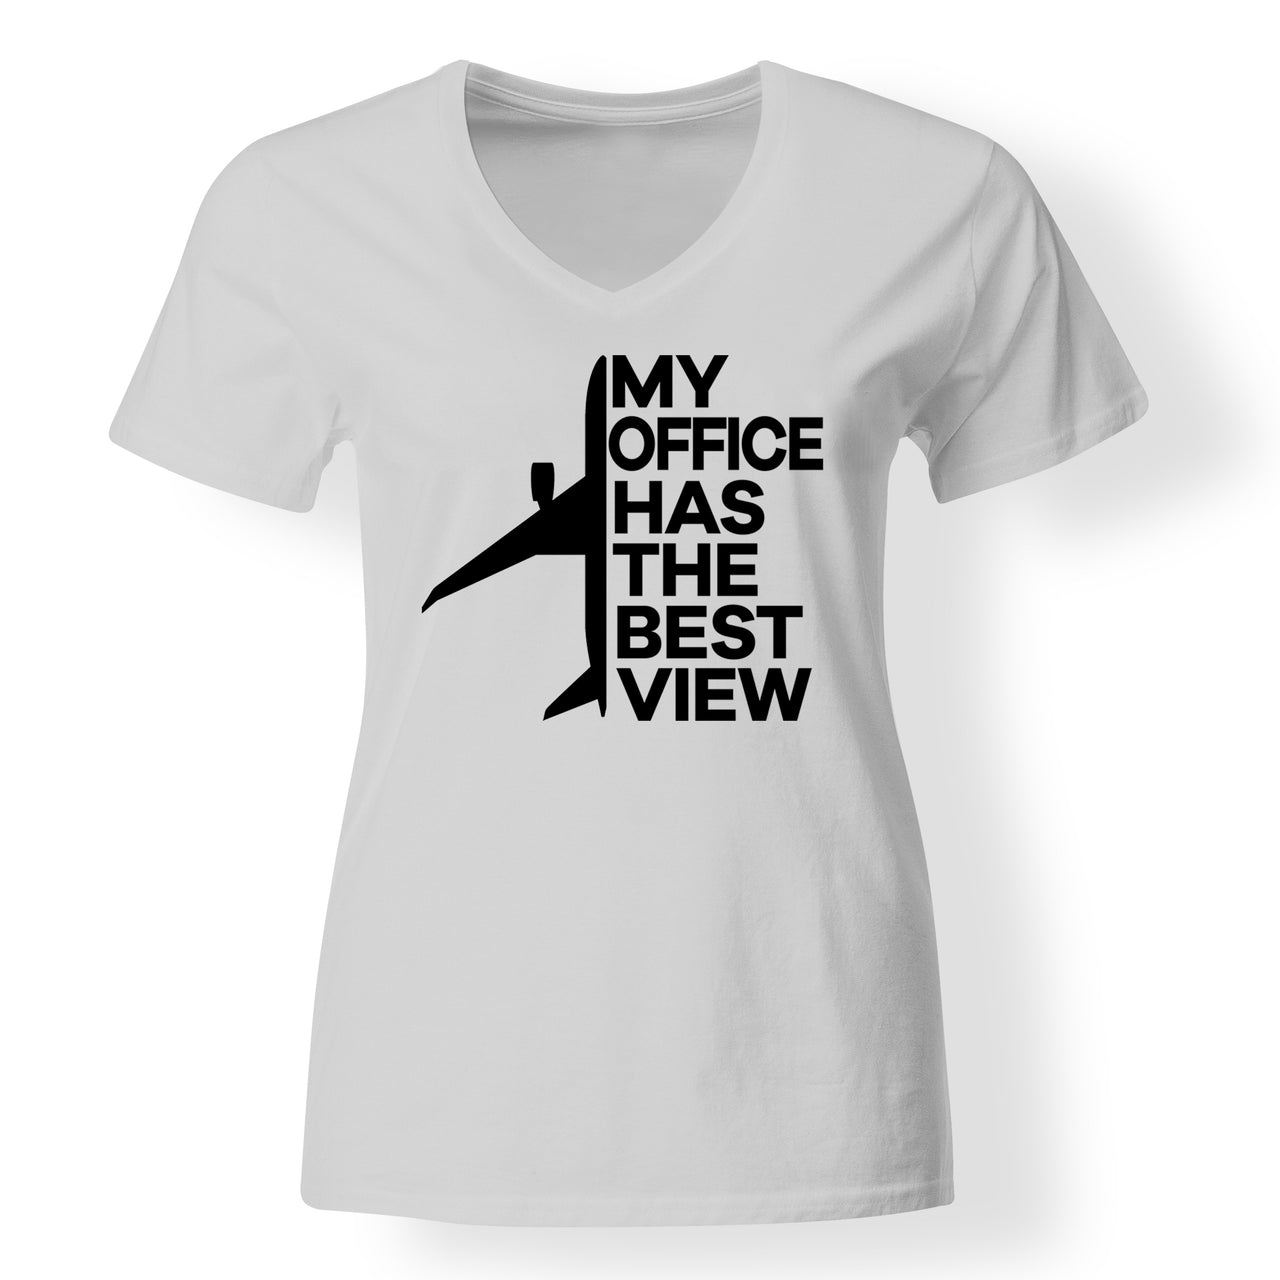 My Office Has The Best View Designed V-Neck T-Shirts